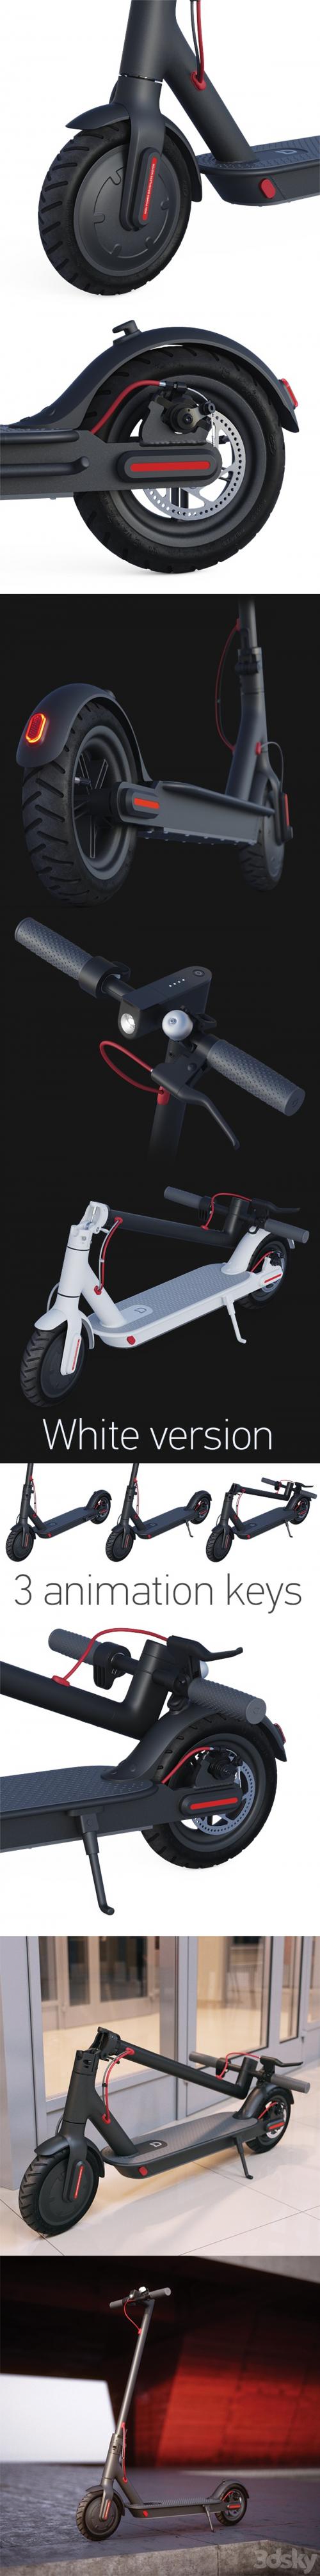 Electric scooter Xiaomi